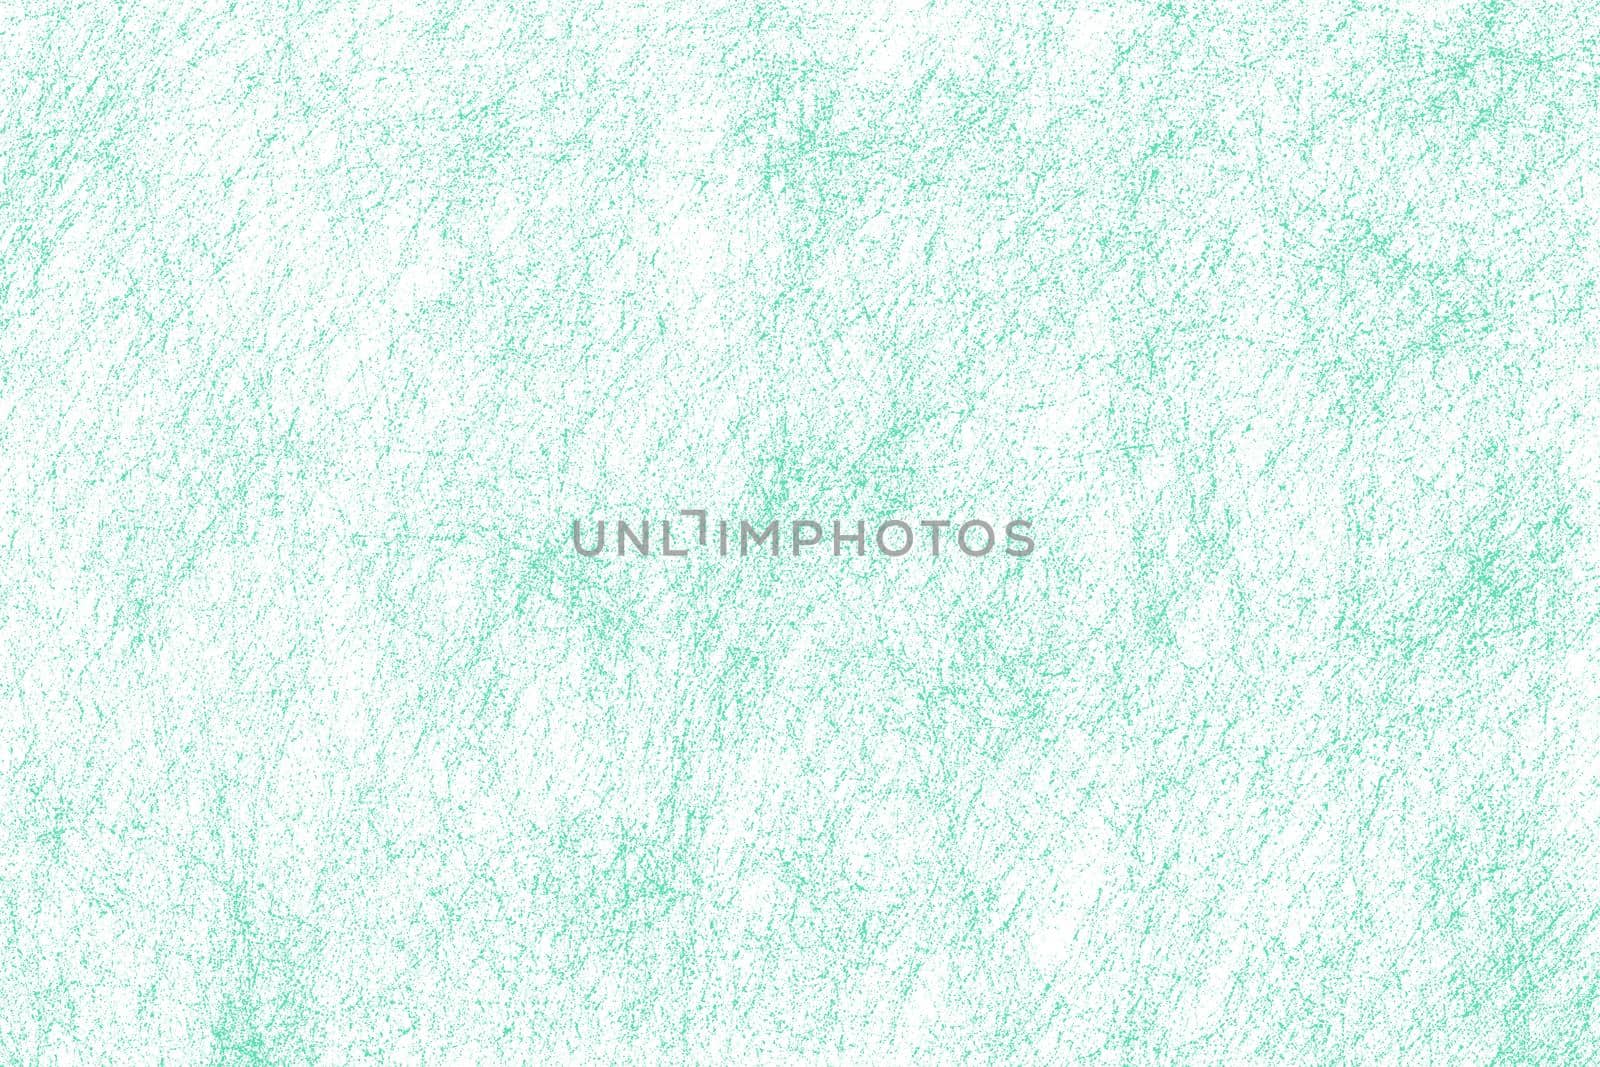 chaotic green splashes of paint on a white background by Eldashev